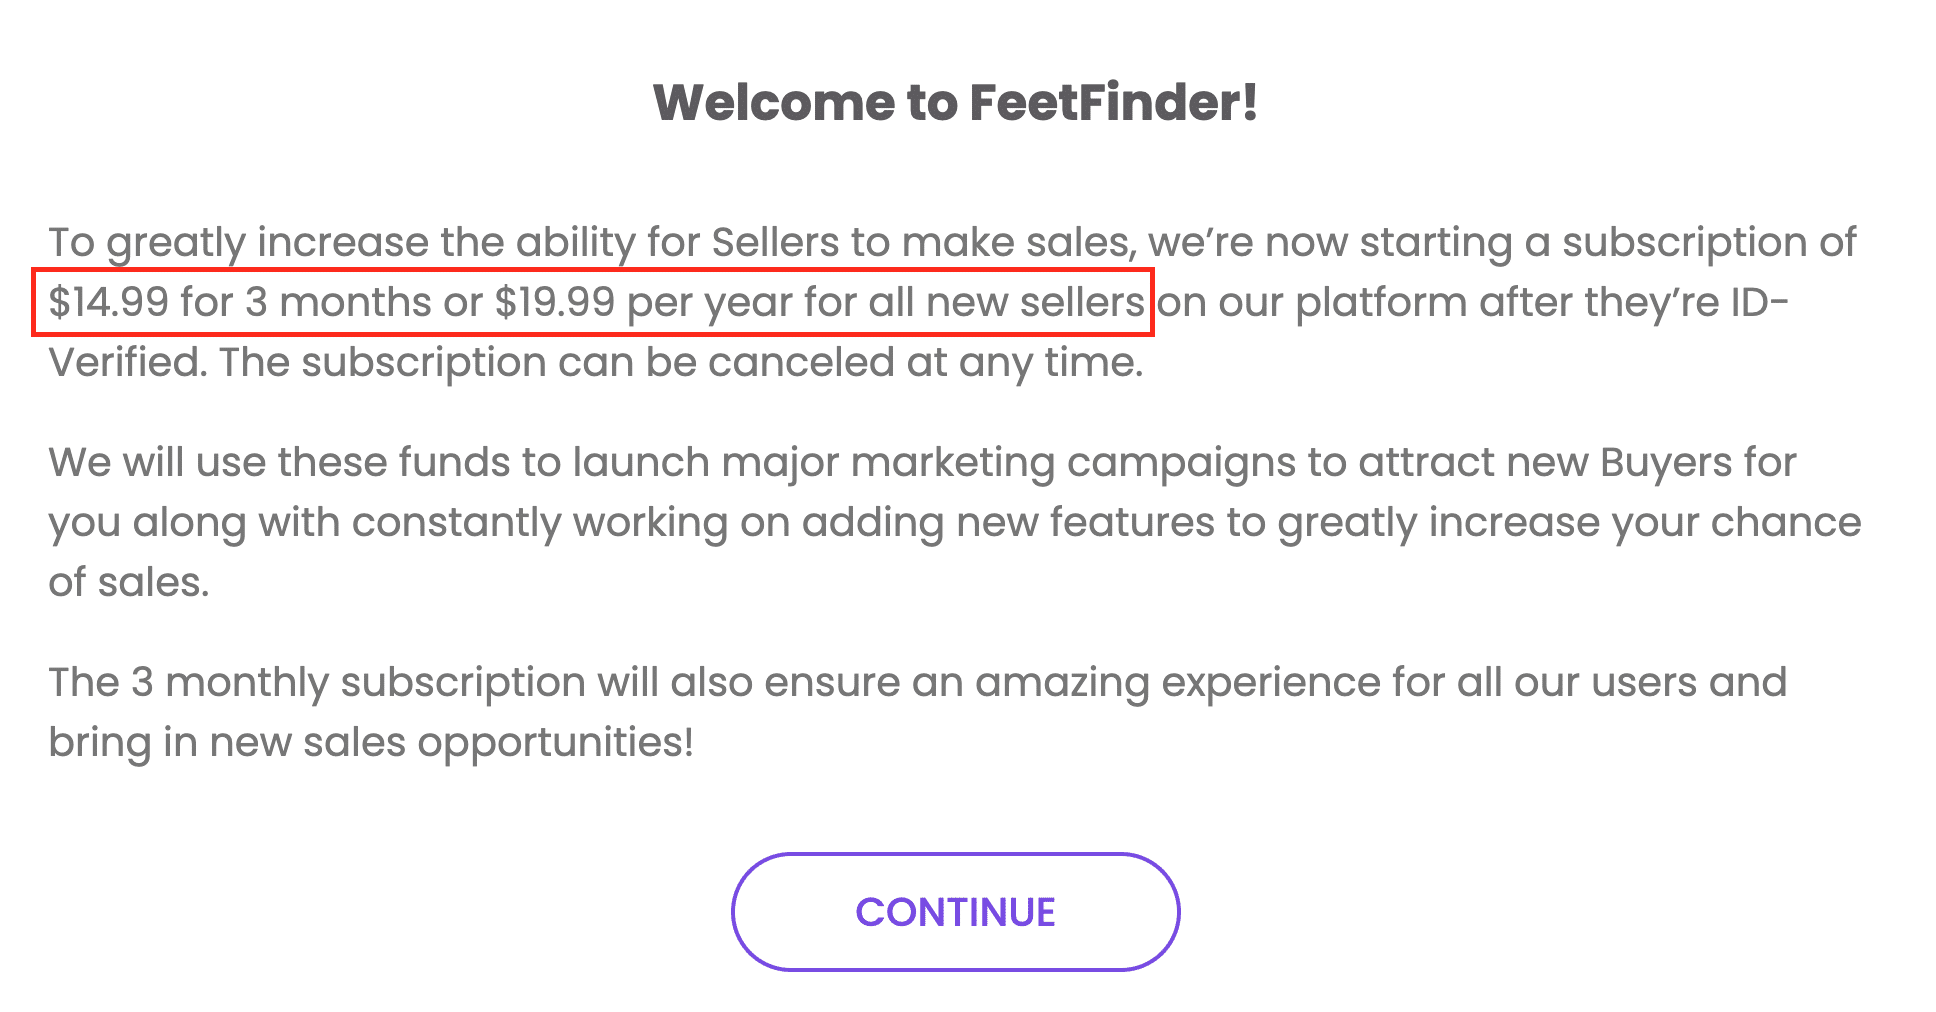 The profile that allows us to sell photos on FeetFinder is for a fee